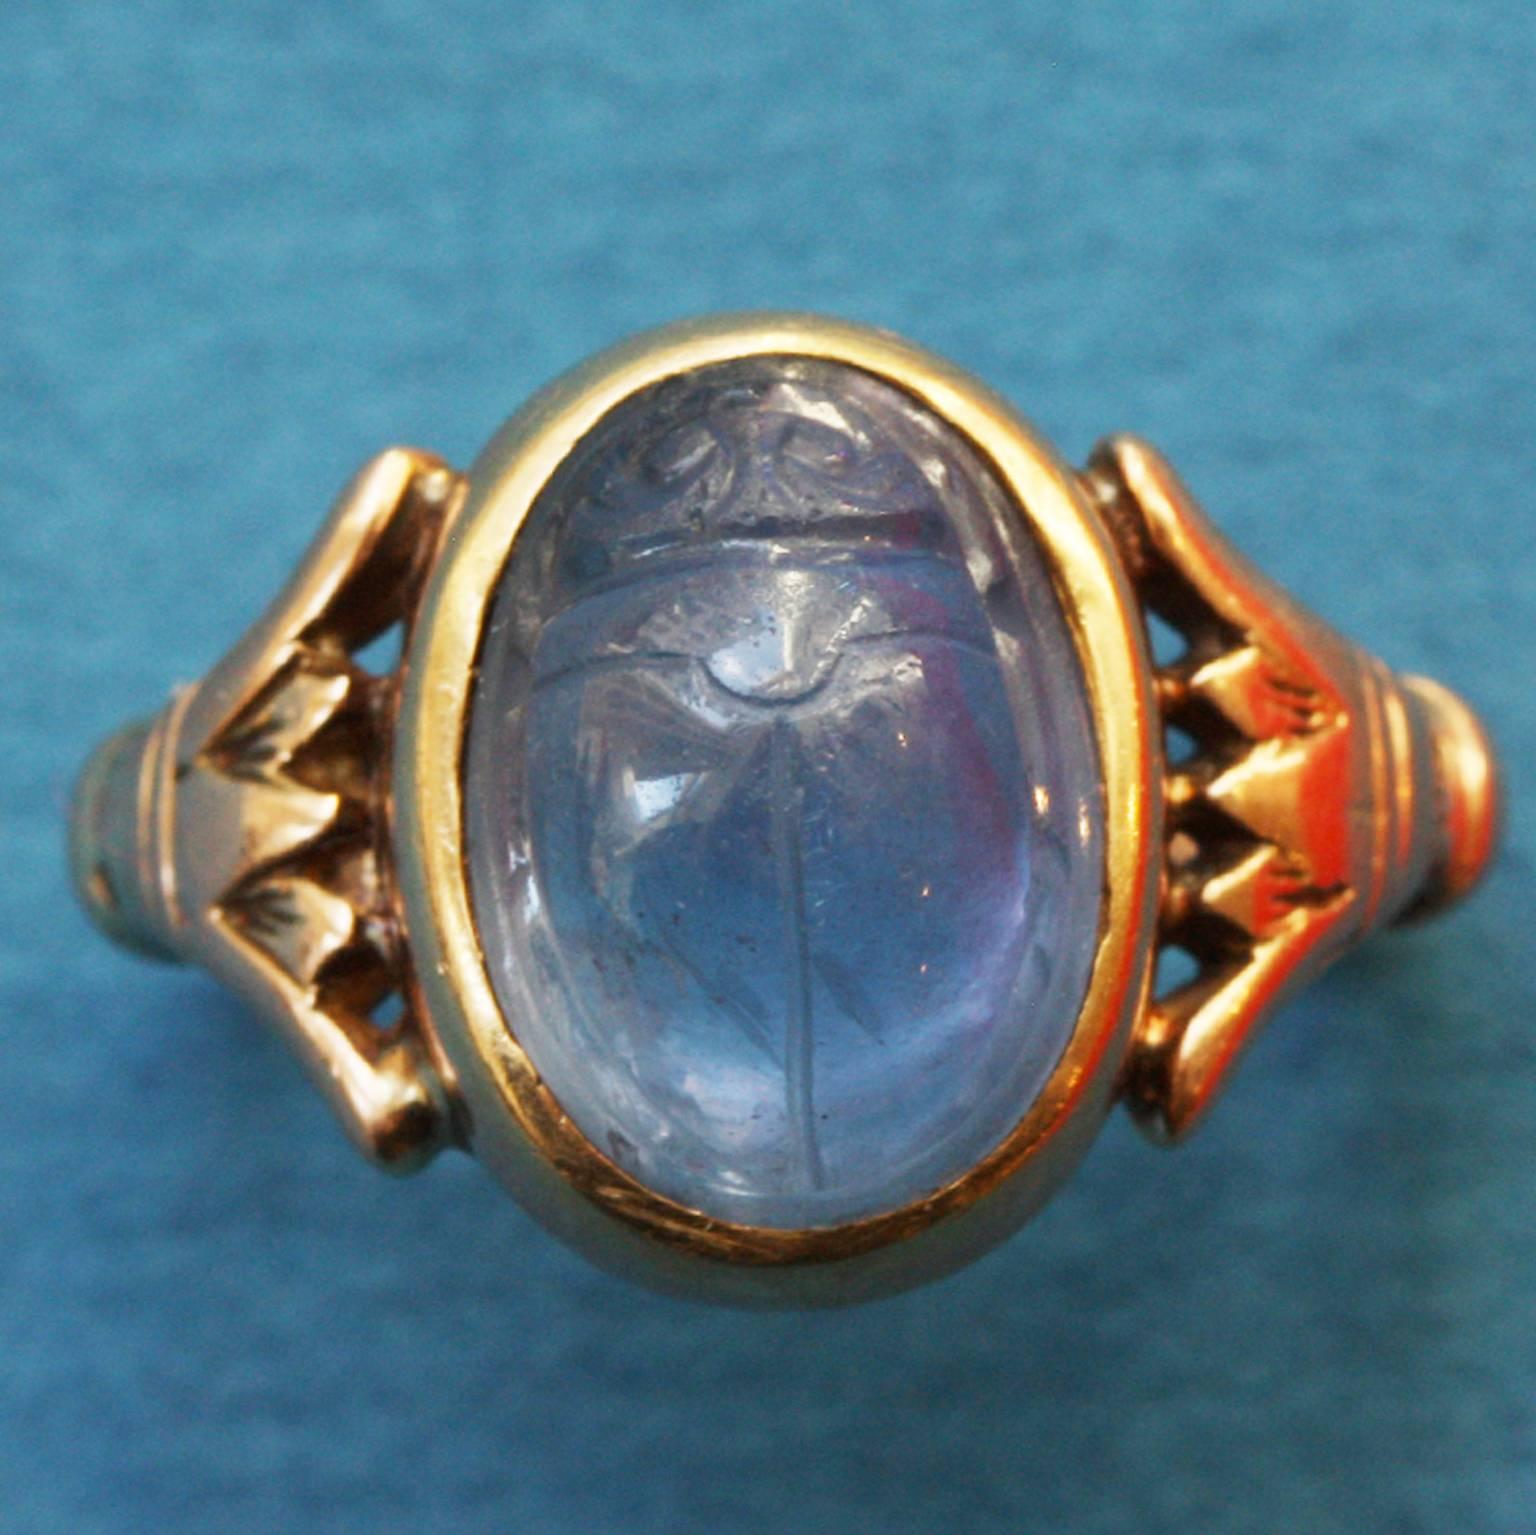 An 14 carat gold Egyptian Revival ring set with a Ceylon sapphire carved in the shape of a scarab, the inside decorated with hieroglyph inspired carvings, the shank decorated with papyrus leaves, signed: Thomas F. Brogan, New York, circa